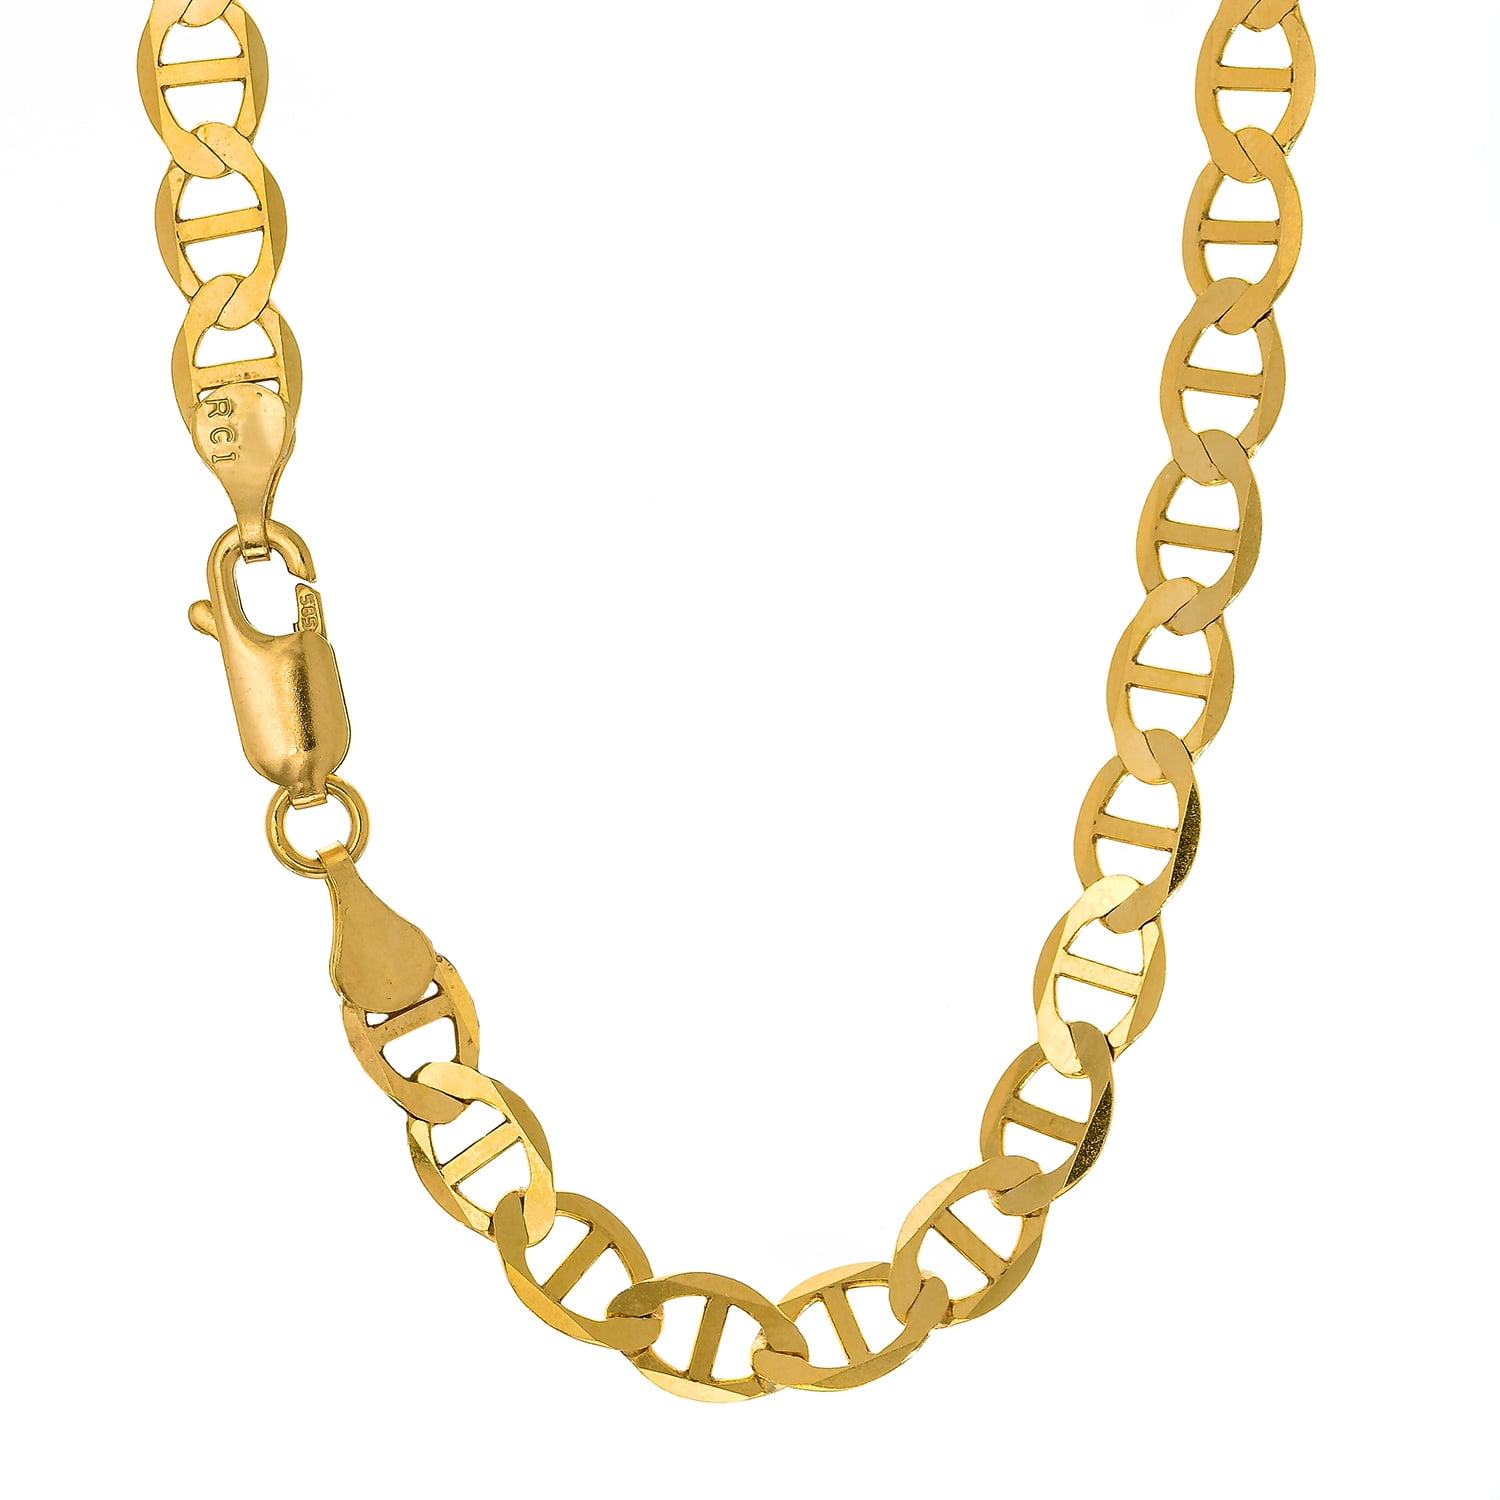 JewelStop 14K Solid Yellow Gold 4.5mm Figaro Chain Bracelet, Lobster Claw - 7 8